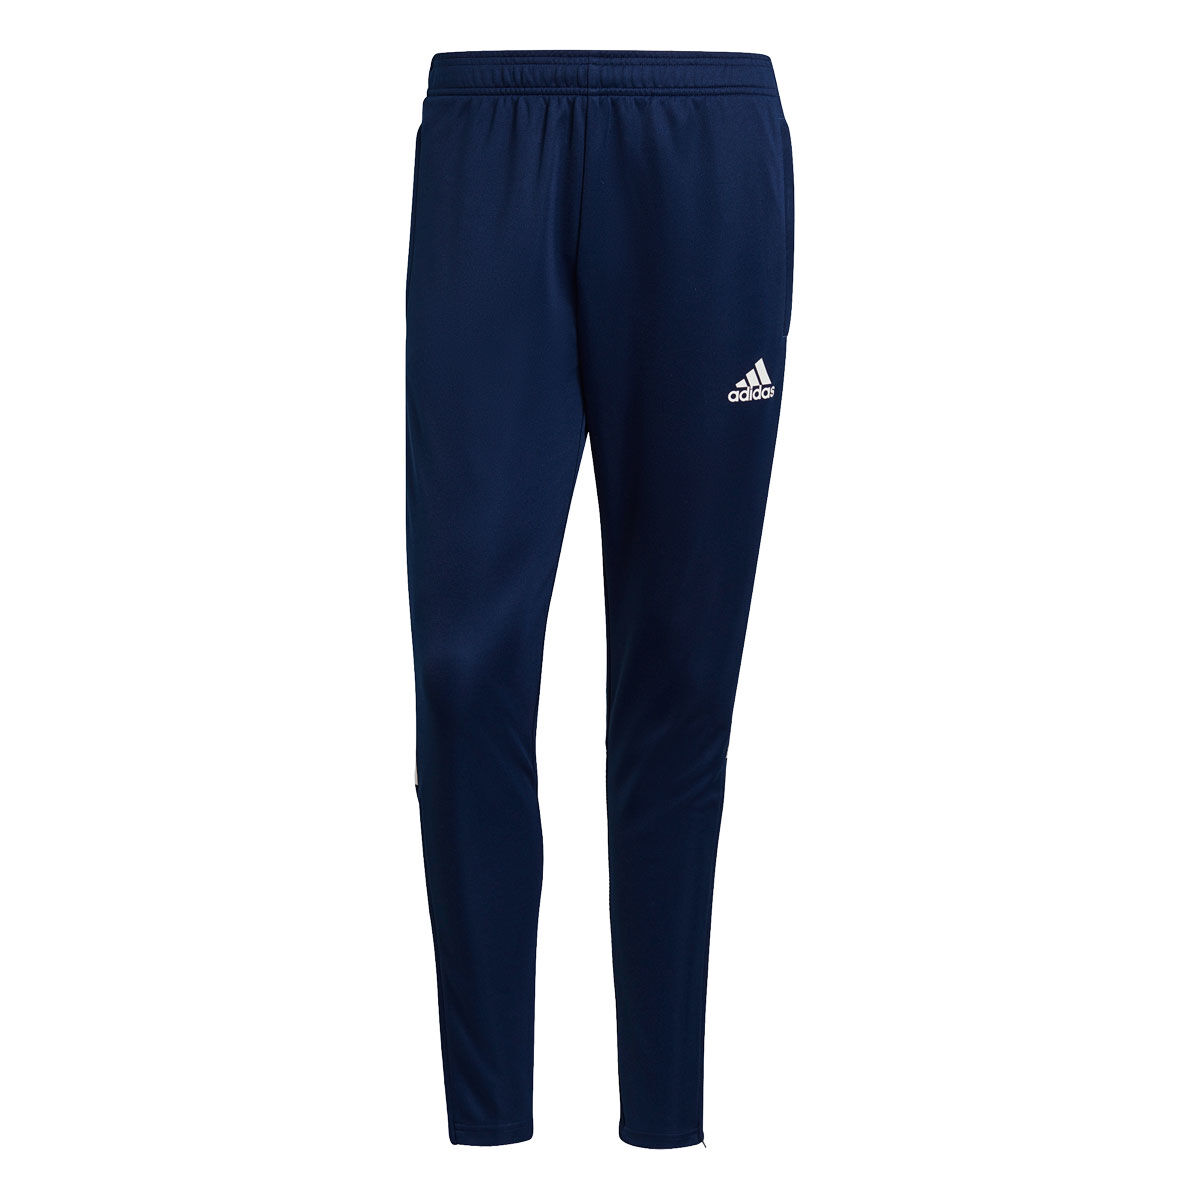 Wildcraft Men Woven Track Pants ZU72R2AKE63 Size 3XL Navy in Mysore   Dealers Manufacturers  Suppliers  Justdial